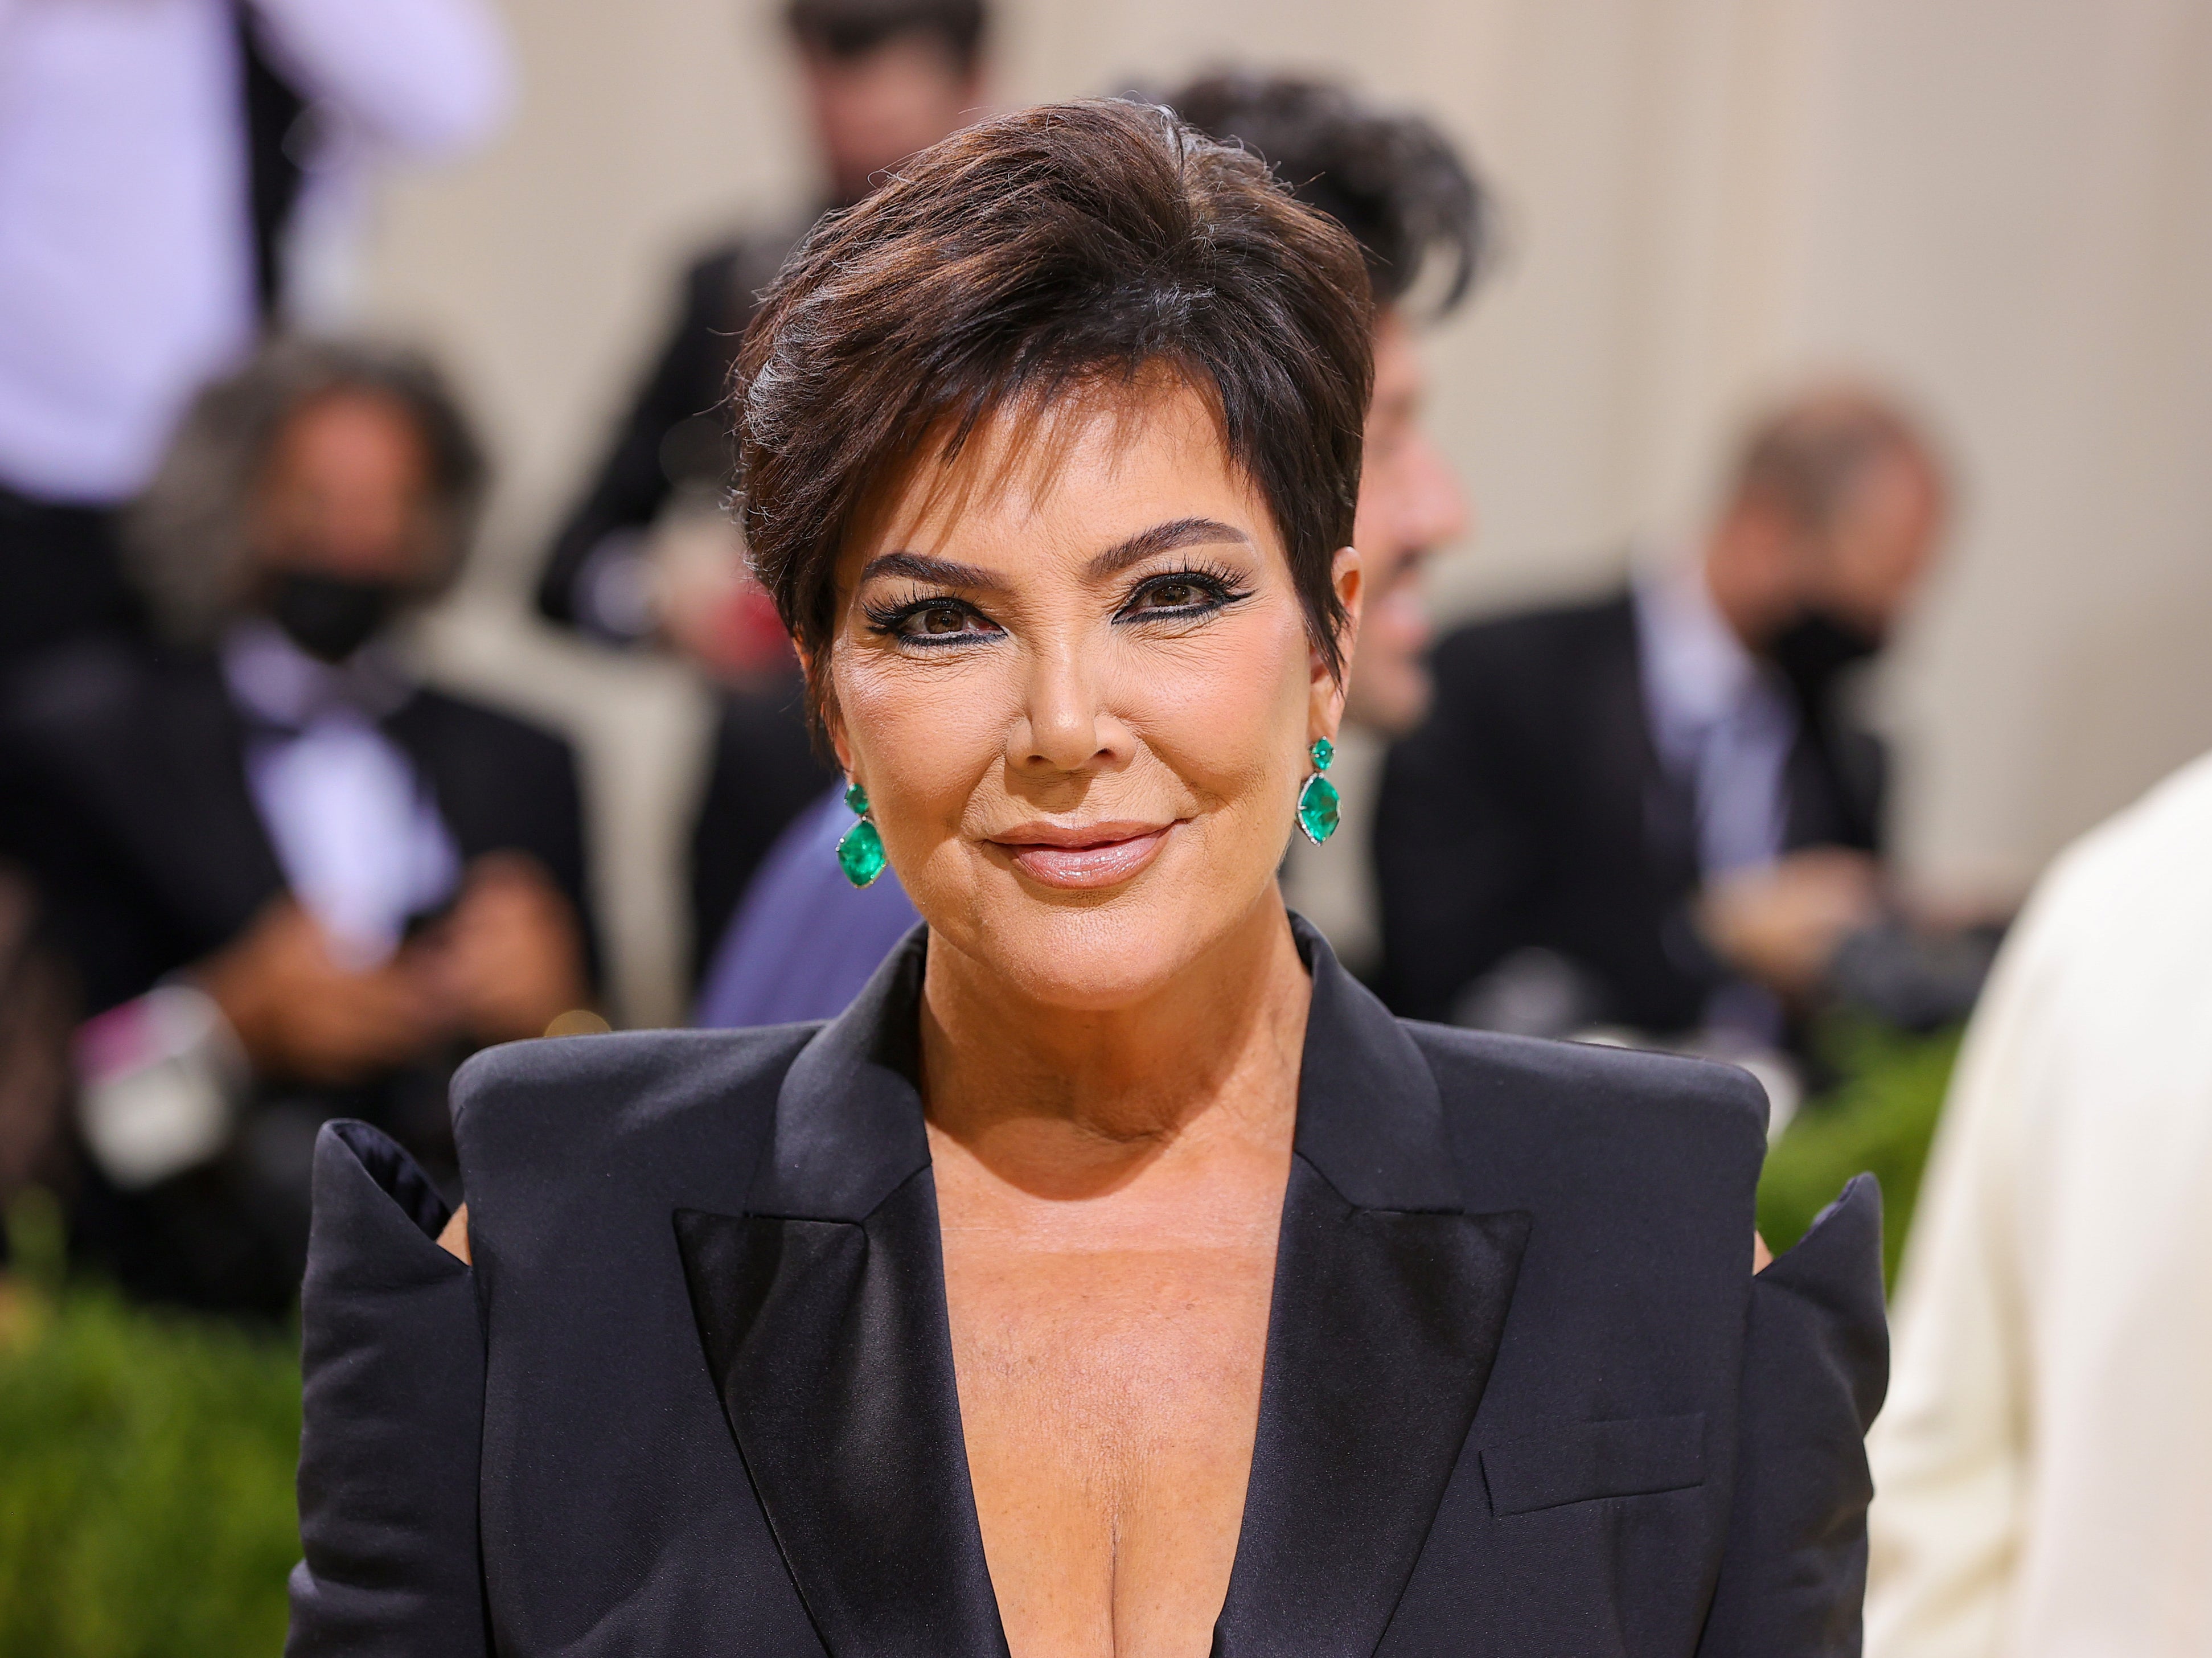 Kris Jenner faces backlash for ‘yelling’ at a driver in The Kardashians ...